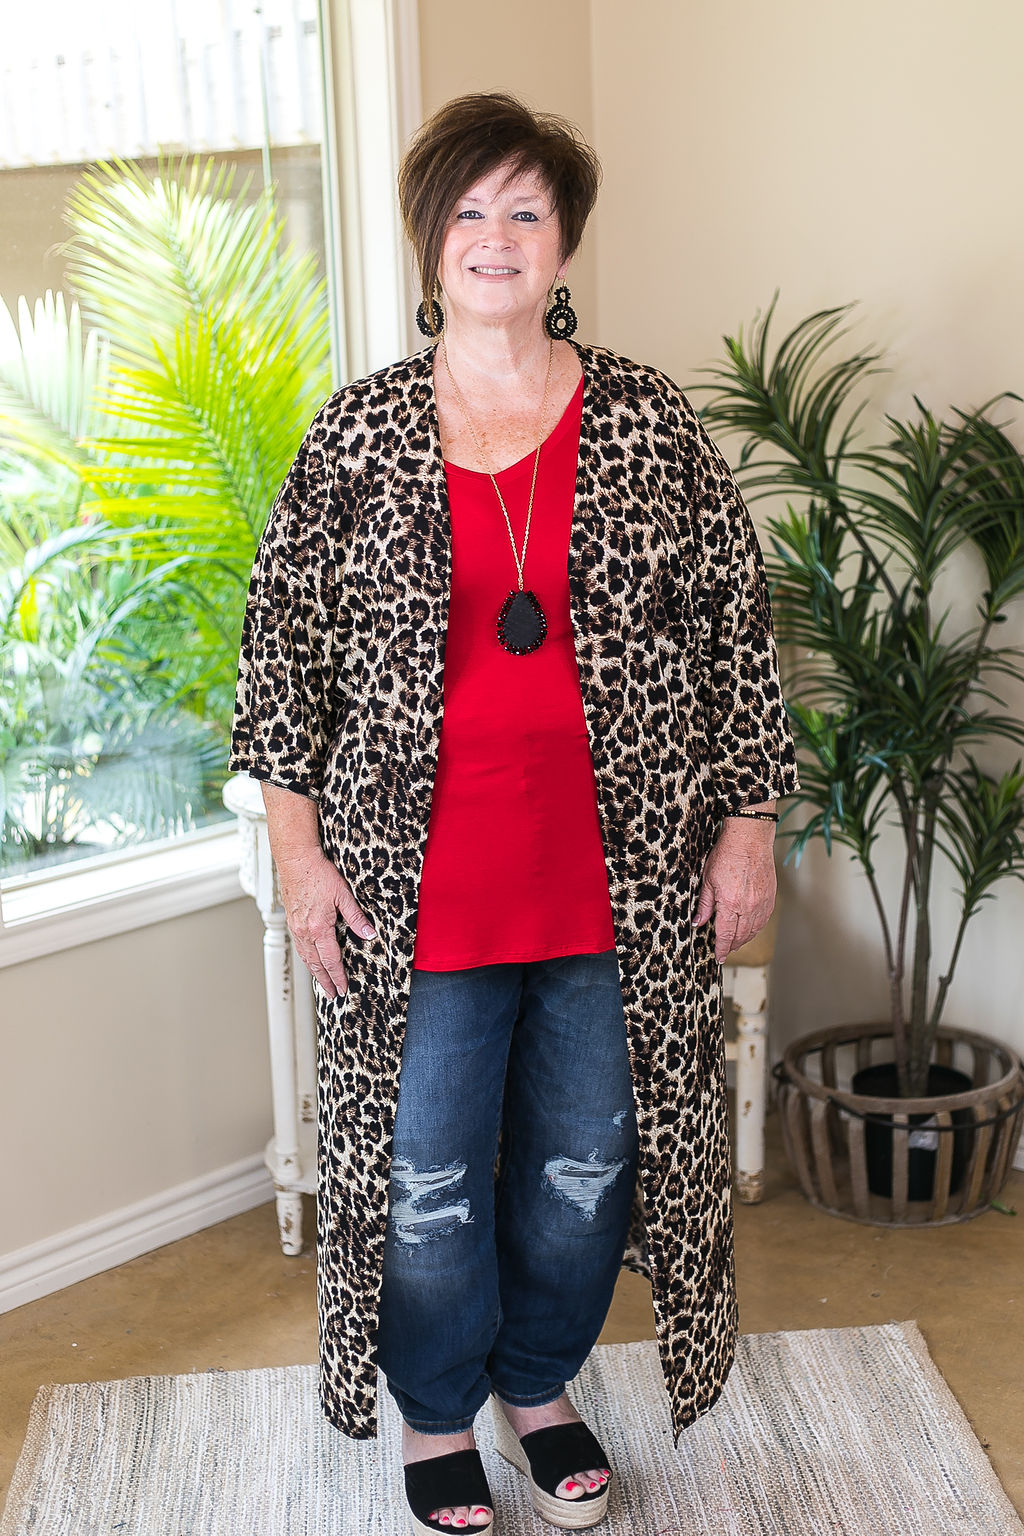 Better Believe It Leopard Print Duster Cardigan - Giddy Up Glamour Boutique